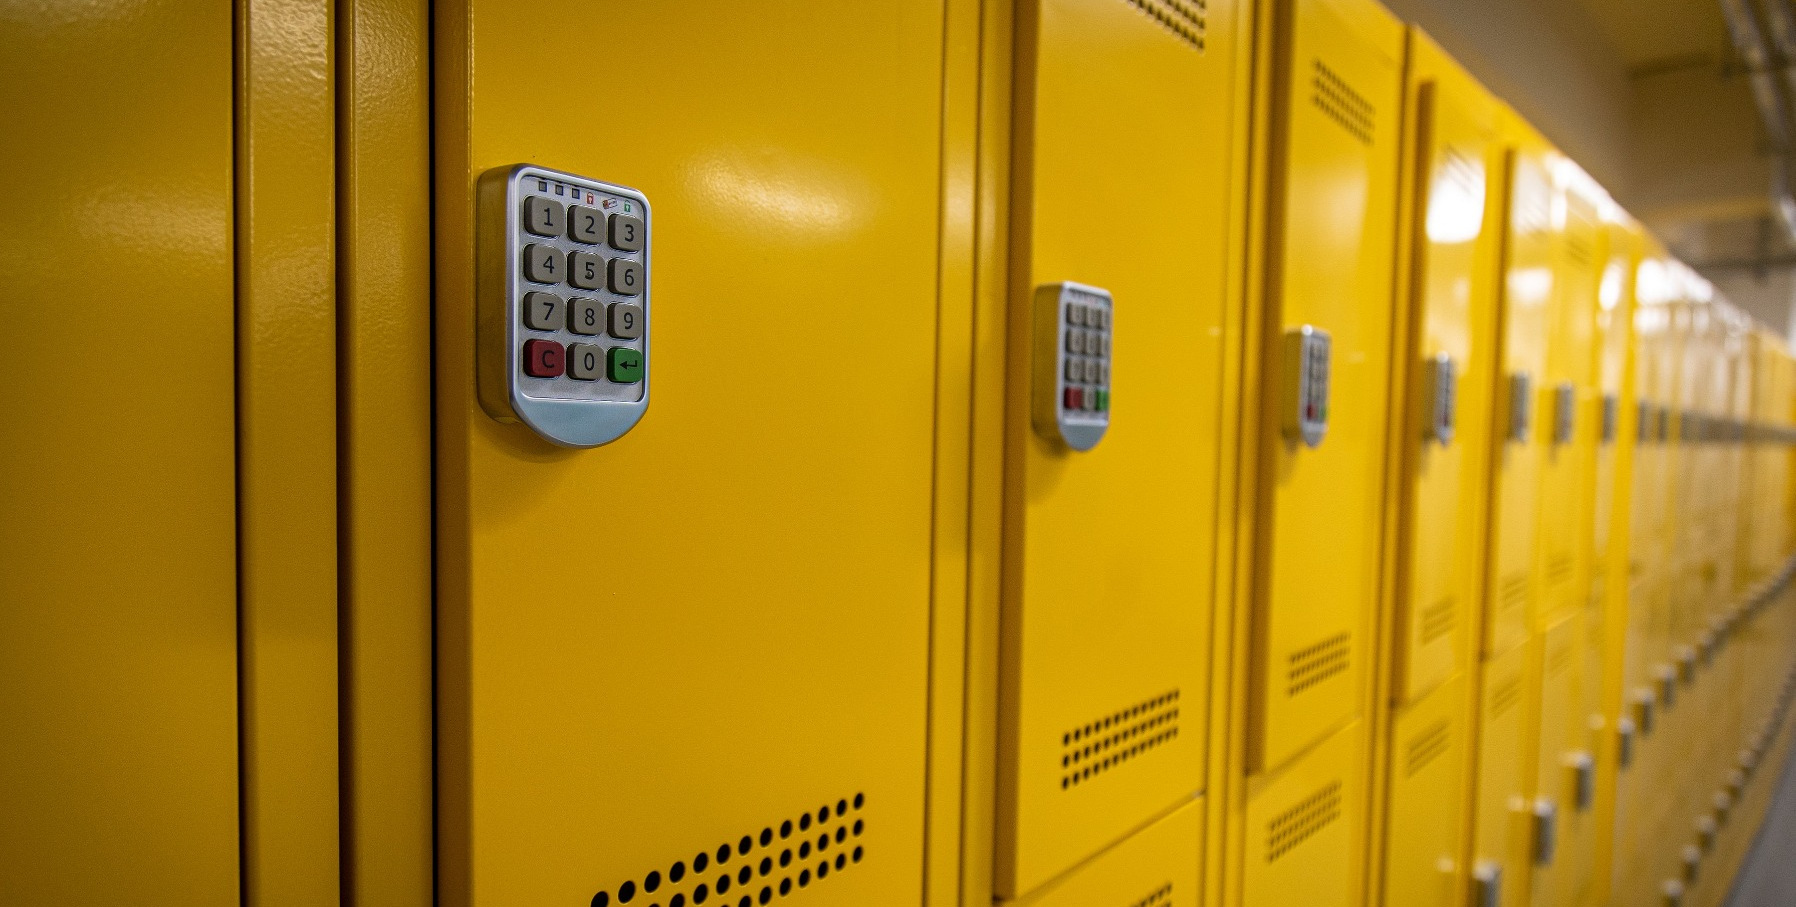 Image of the Bike Dock Solutions lockers set up in a school or university